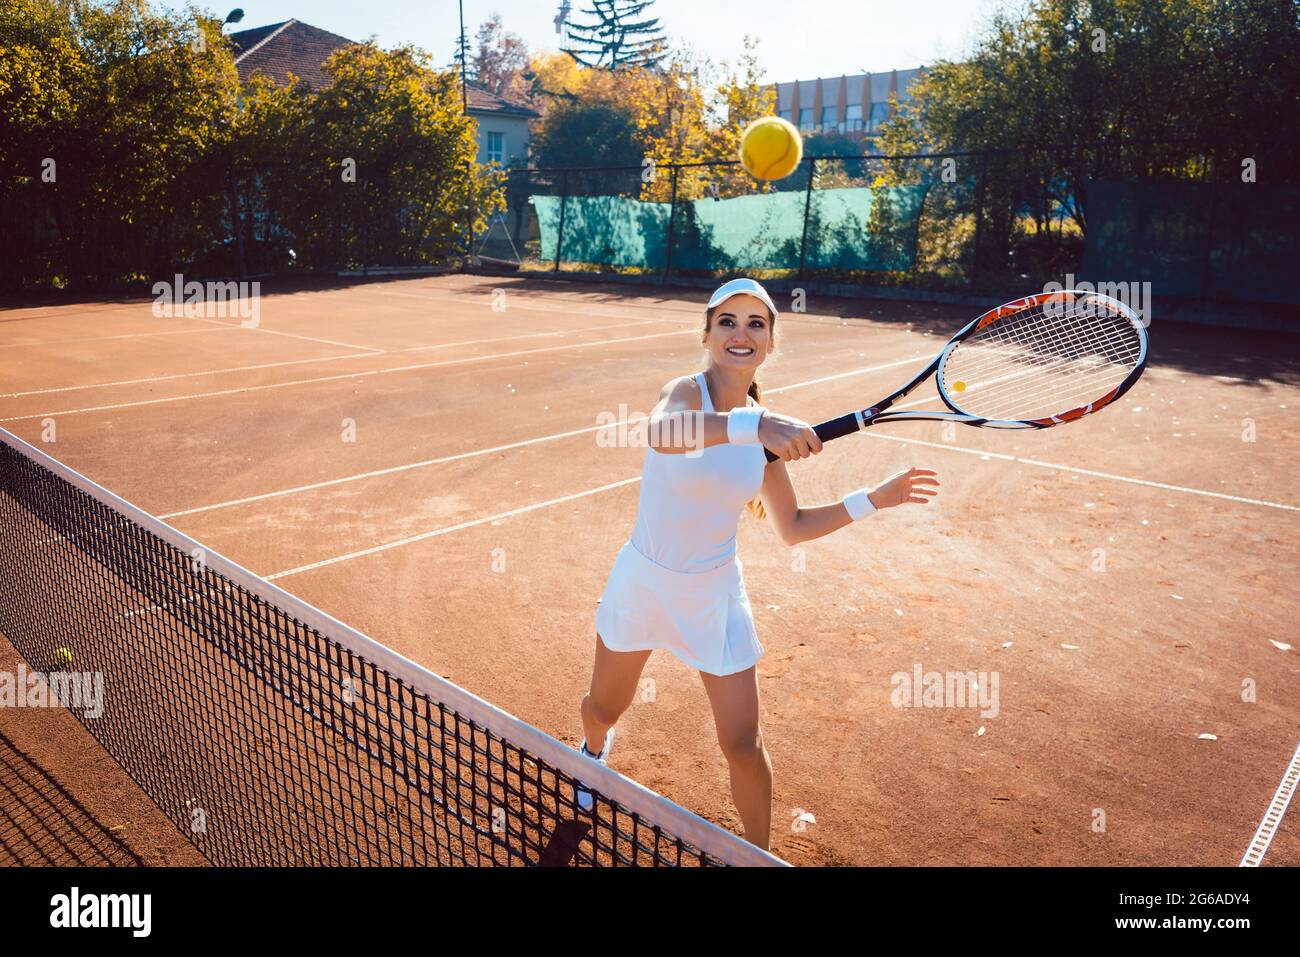 Woman hitting the tennis ball on the court Stock Photo